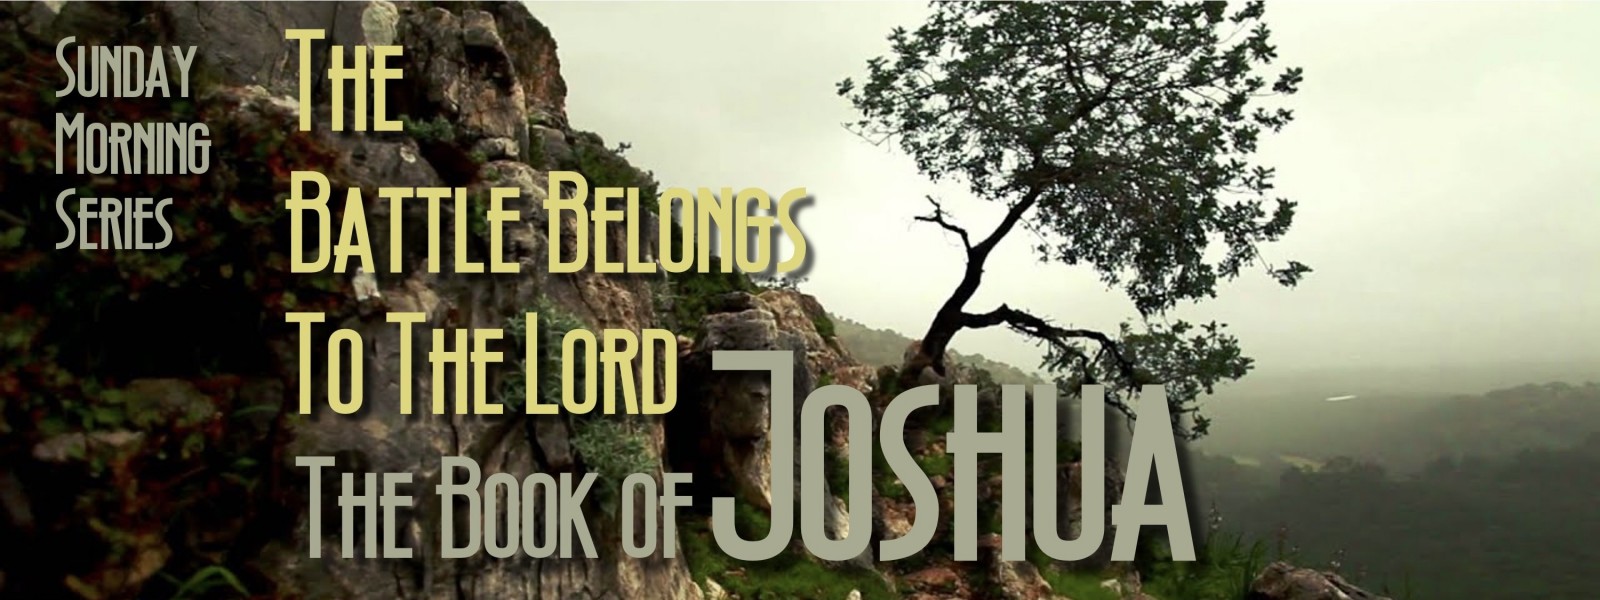 Sunday Morning Series - The book of Joshua, the battles belong to the Lord!